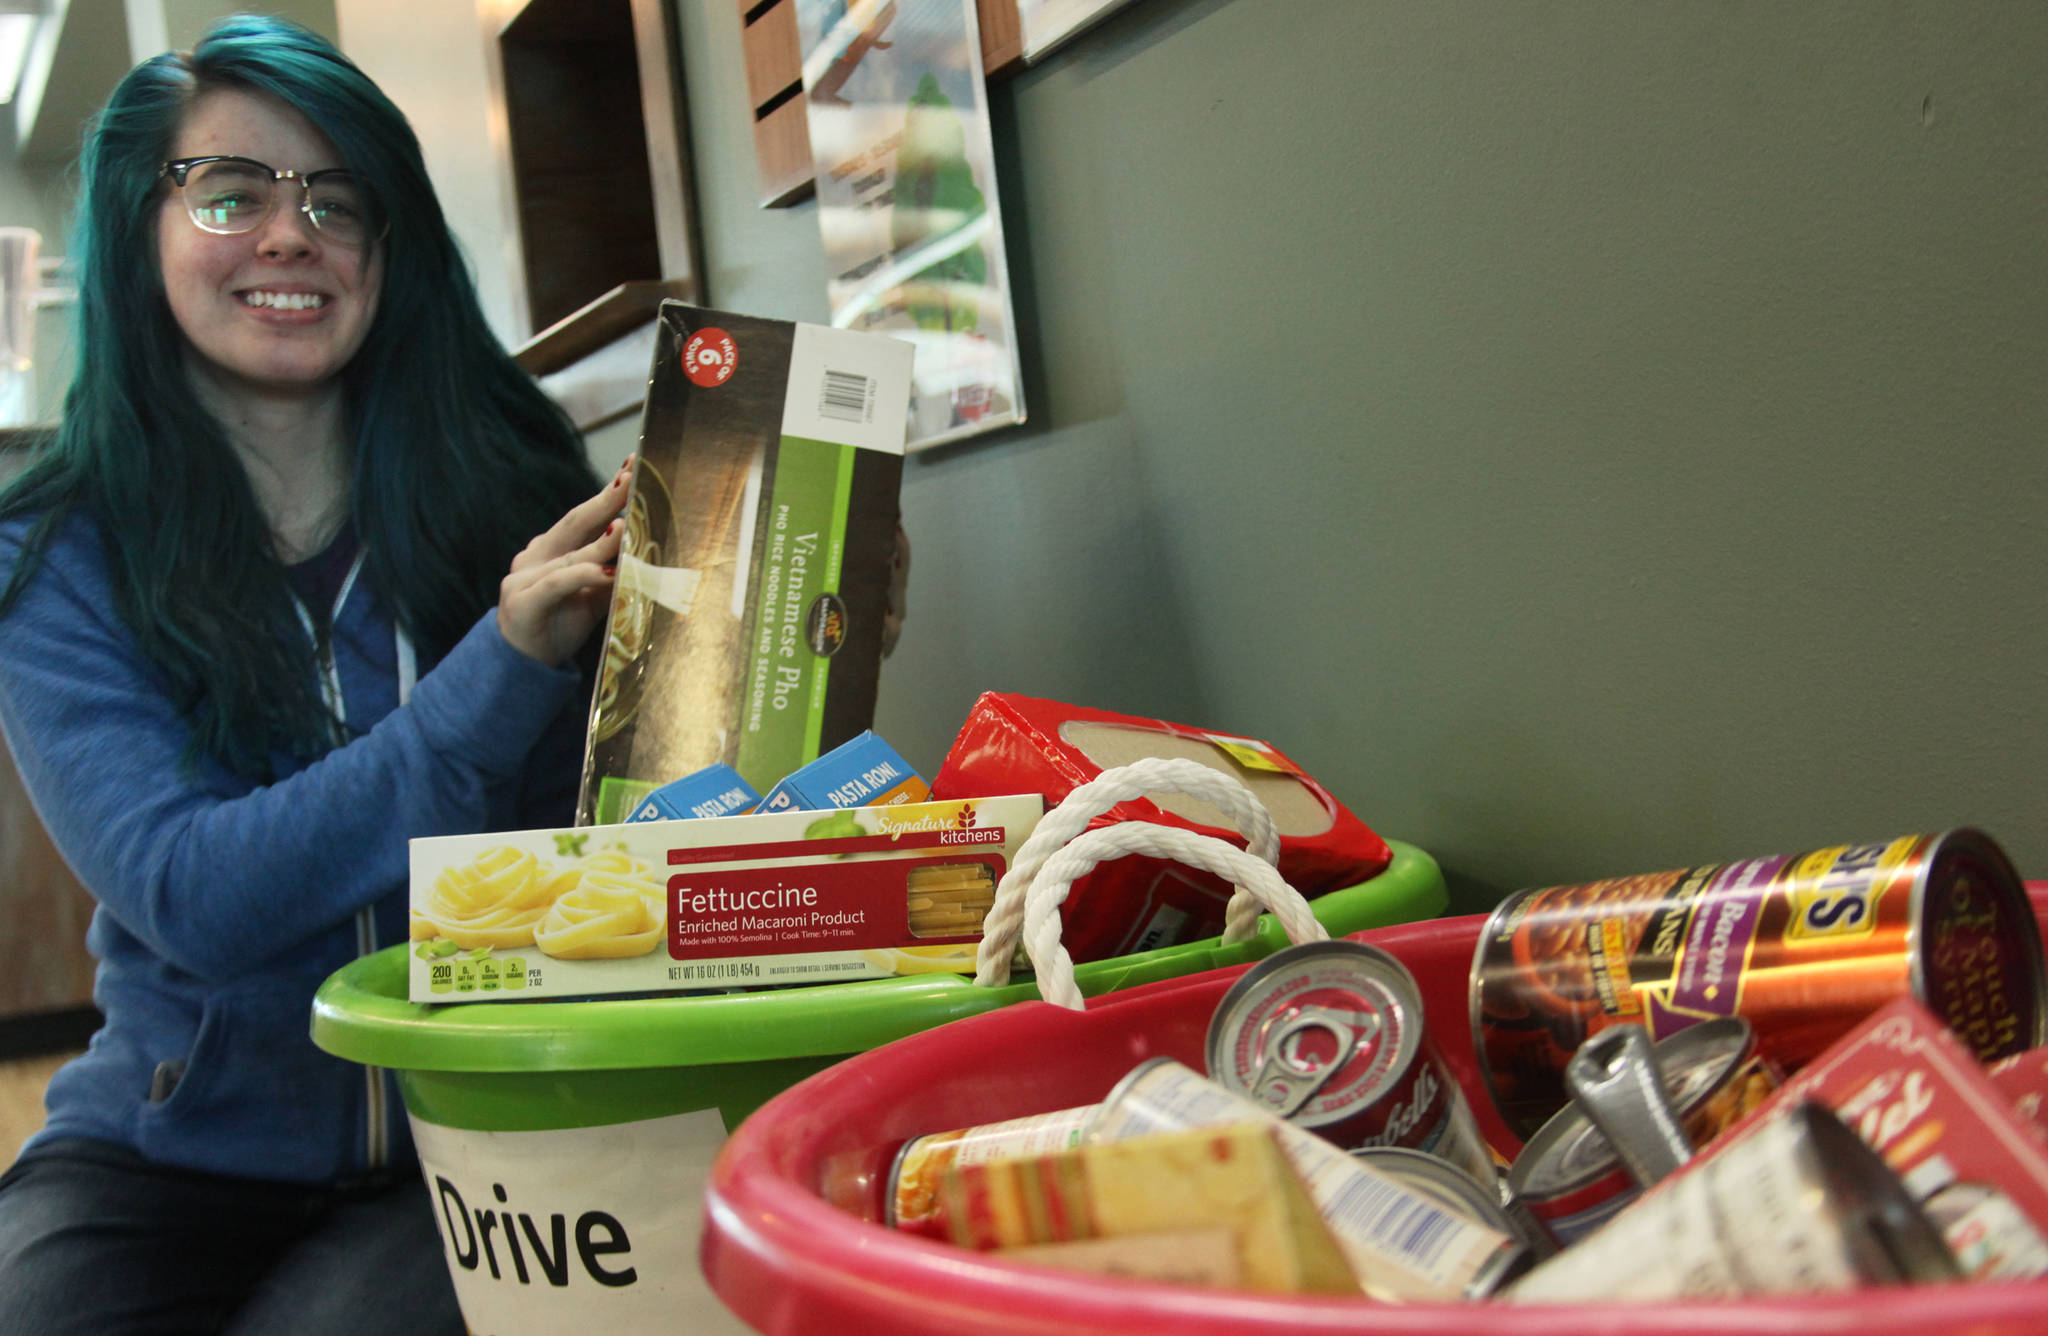 Youth Librarian Ali Jobe of the Joyce K. Carver Memorial Soldotna Public Library sits beside the canned goods and other nonperishable food items that library patrons have donated to the Kenai Peninsula Food Bank in lieu of late fees during the library’s food for fines collection drive on Wednesday, April 11, 2018 in Soldotna, Alaska. In addition to the two and a half bins of food at the library entrance, the Food Bank has already recieved 193 pounds of food since the library began collecting on April 9. Soldotna librarians will take food for fines — at an exchange rate of $1 per item — until April 14. (Ben Boettger/Peninsula Clarion).